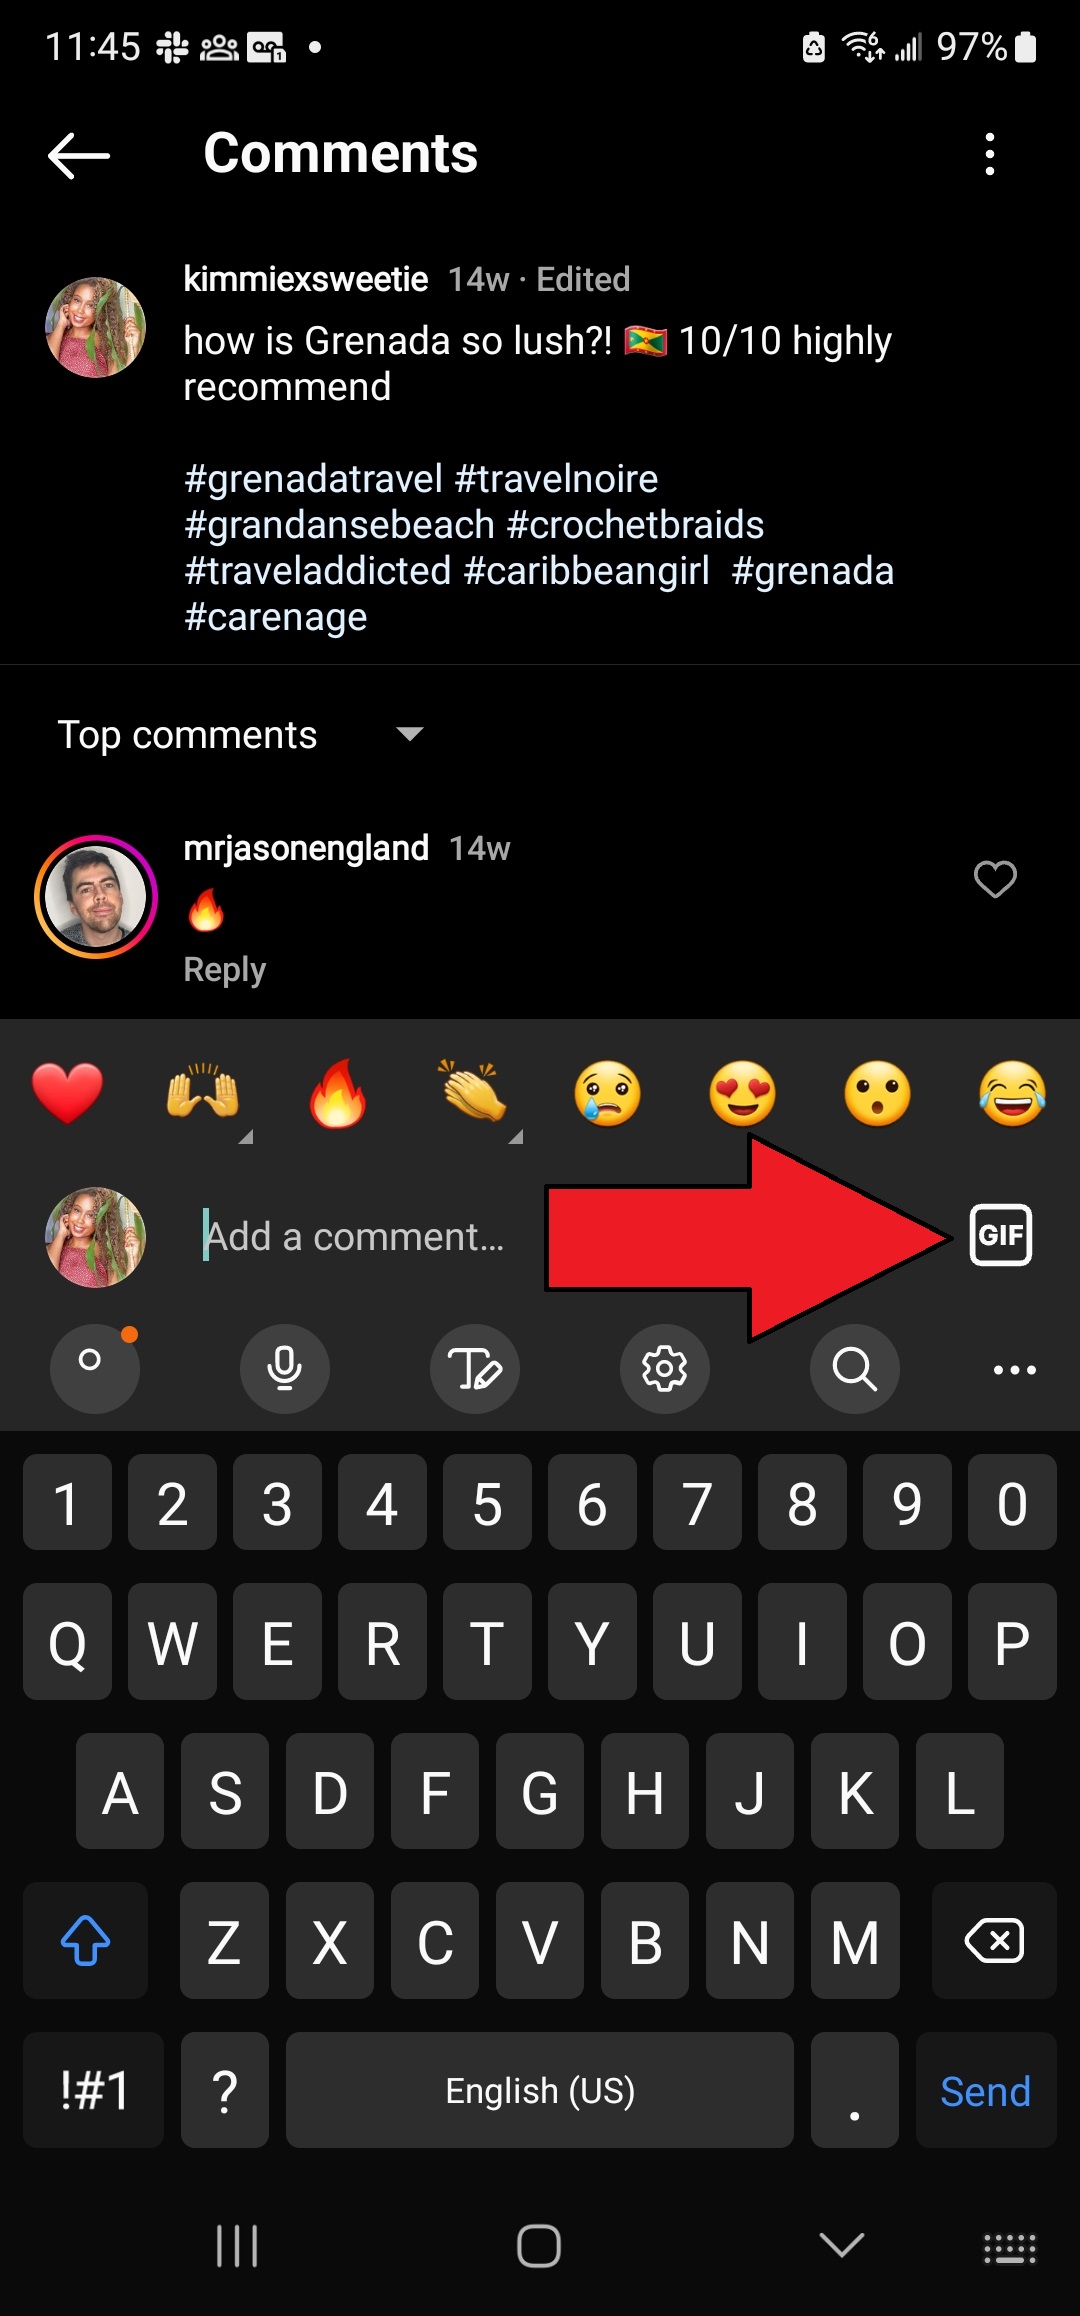 How to post GIFs on Instagram